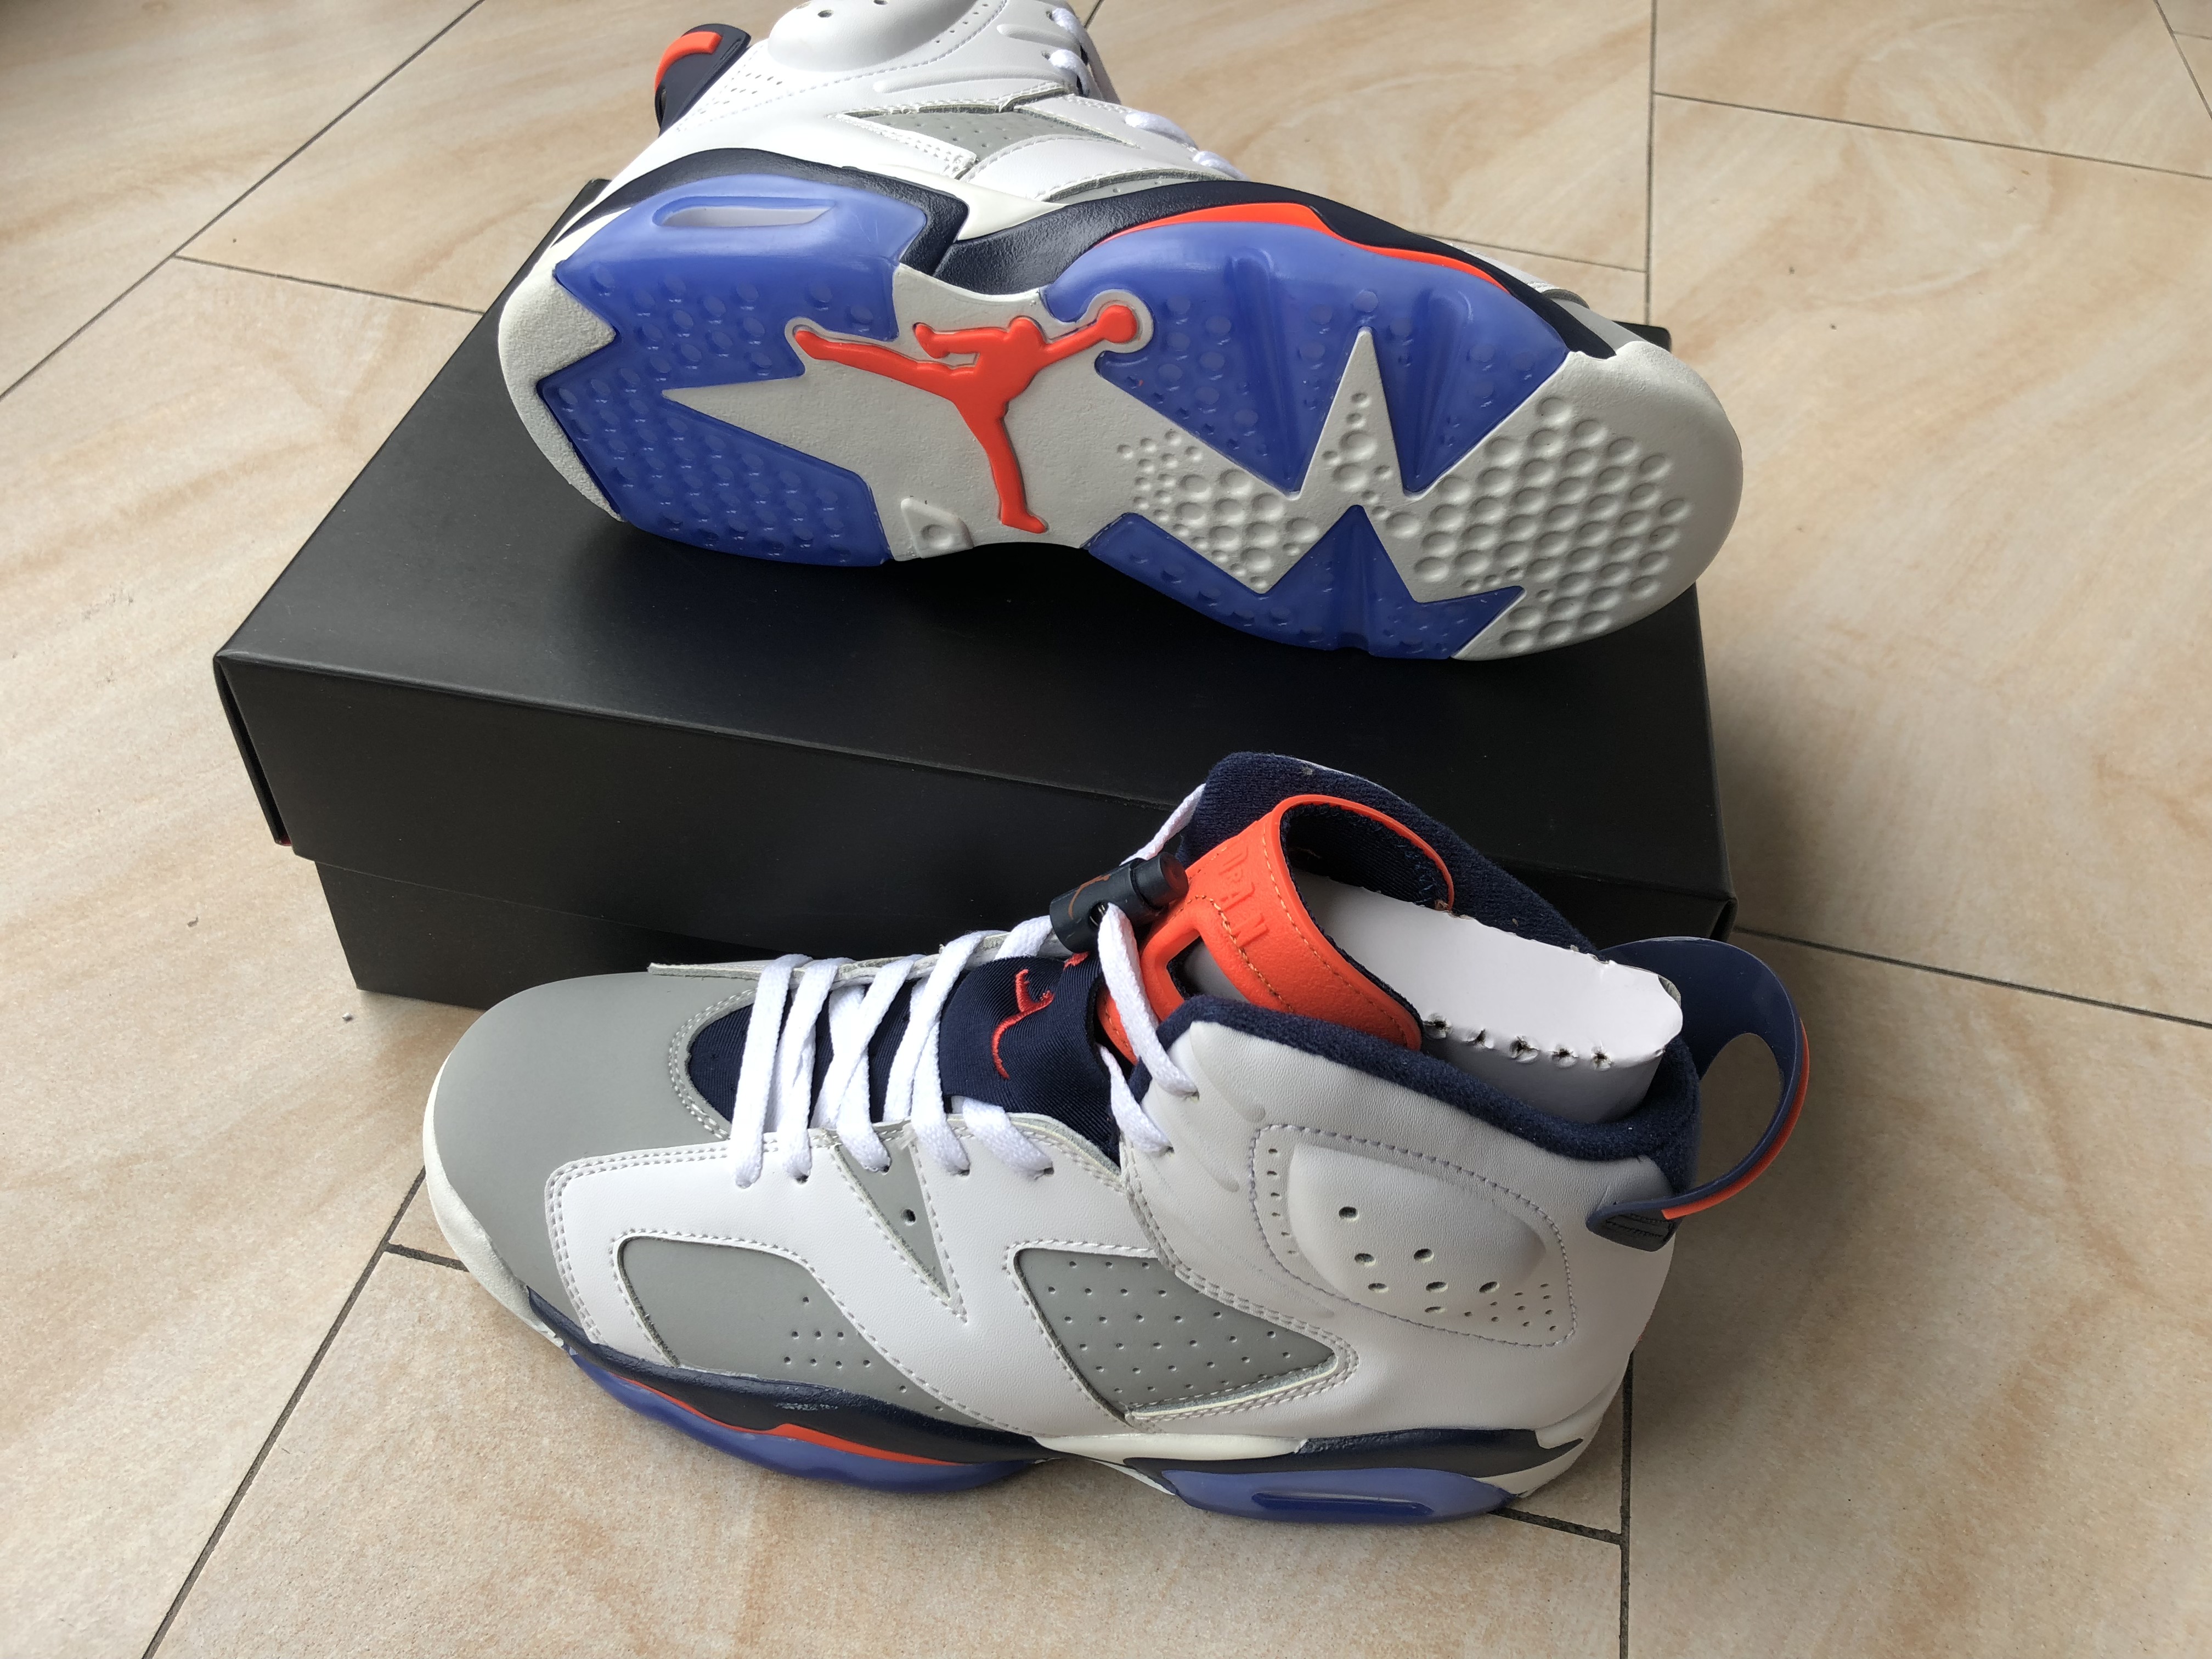 New Air Jordan 6 Handcraft Grey White Red Blue Shoes